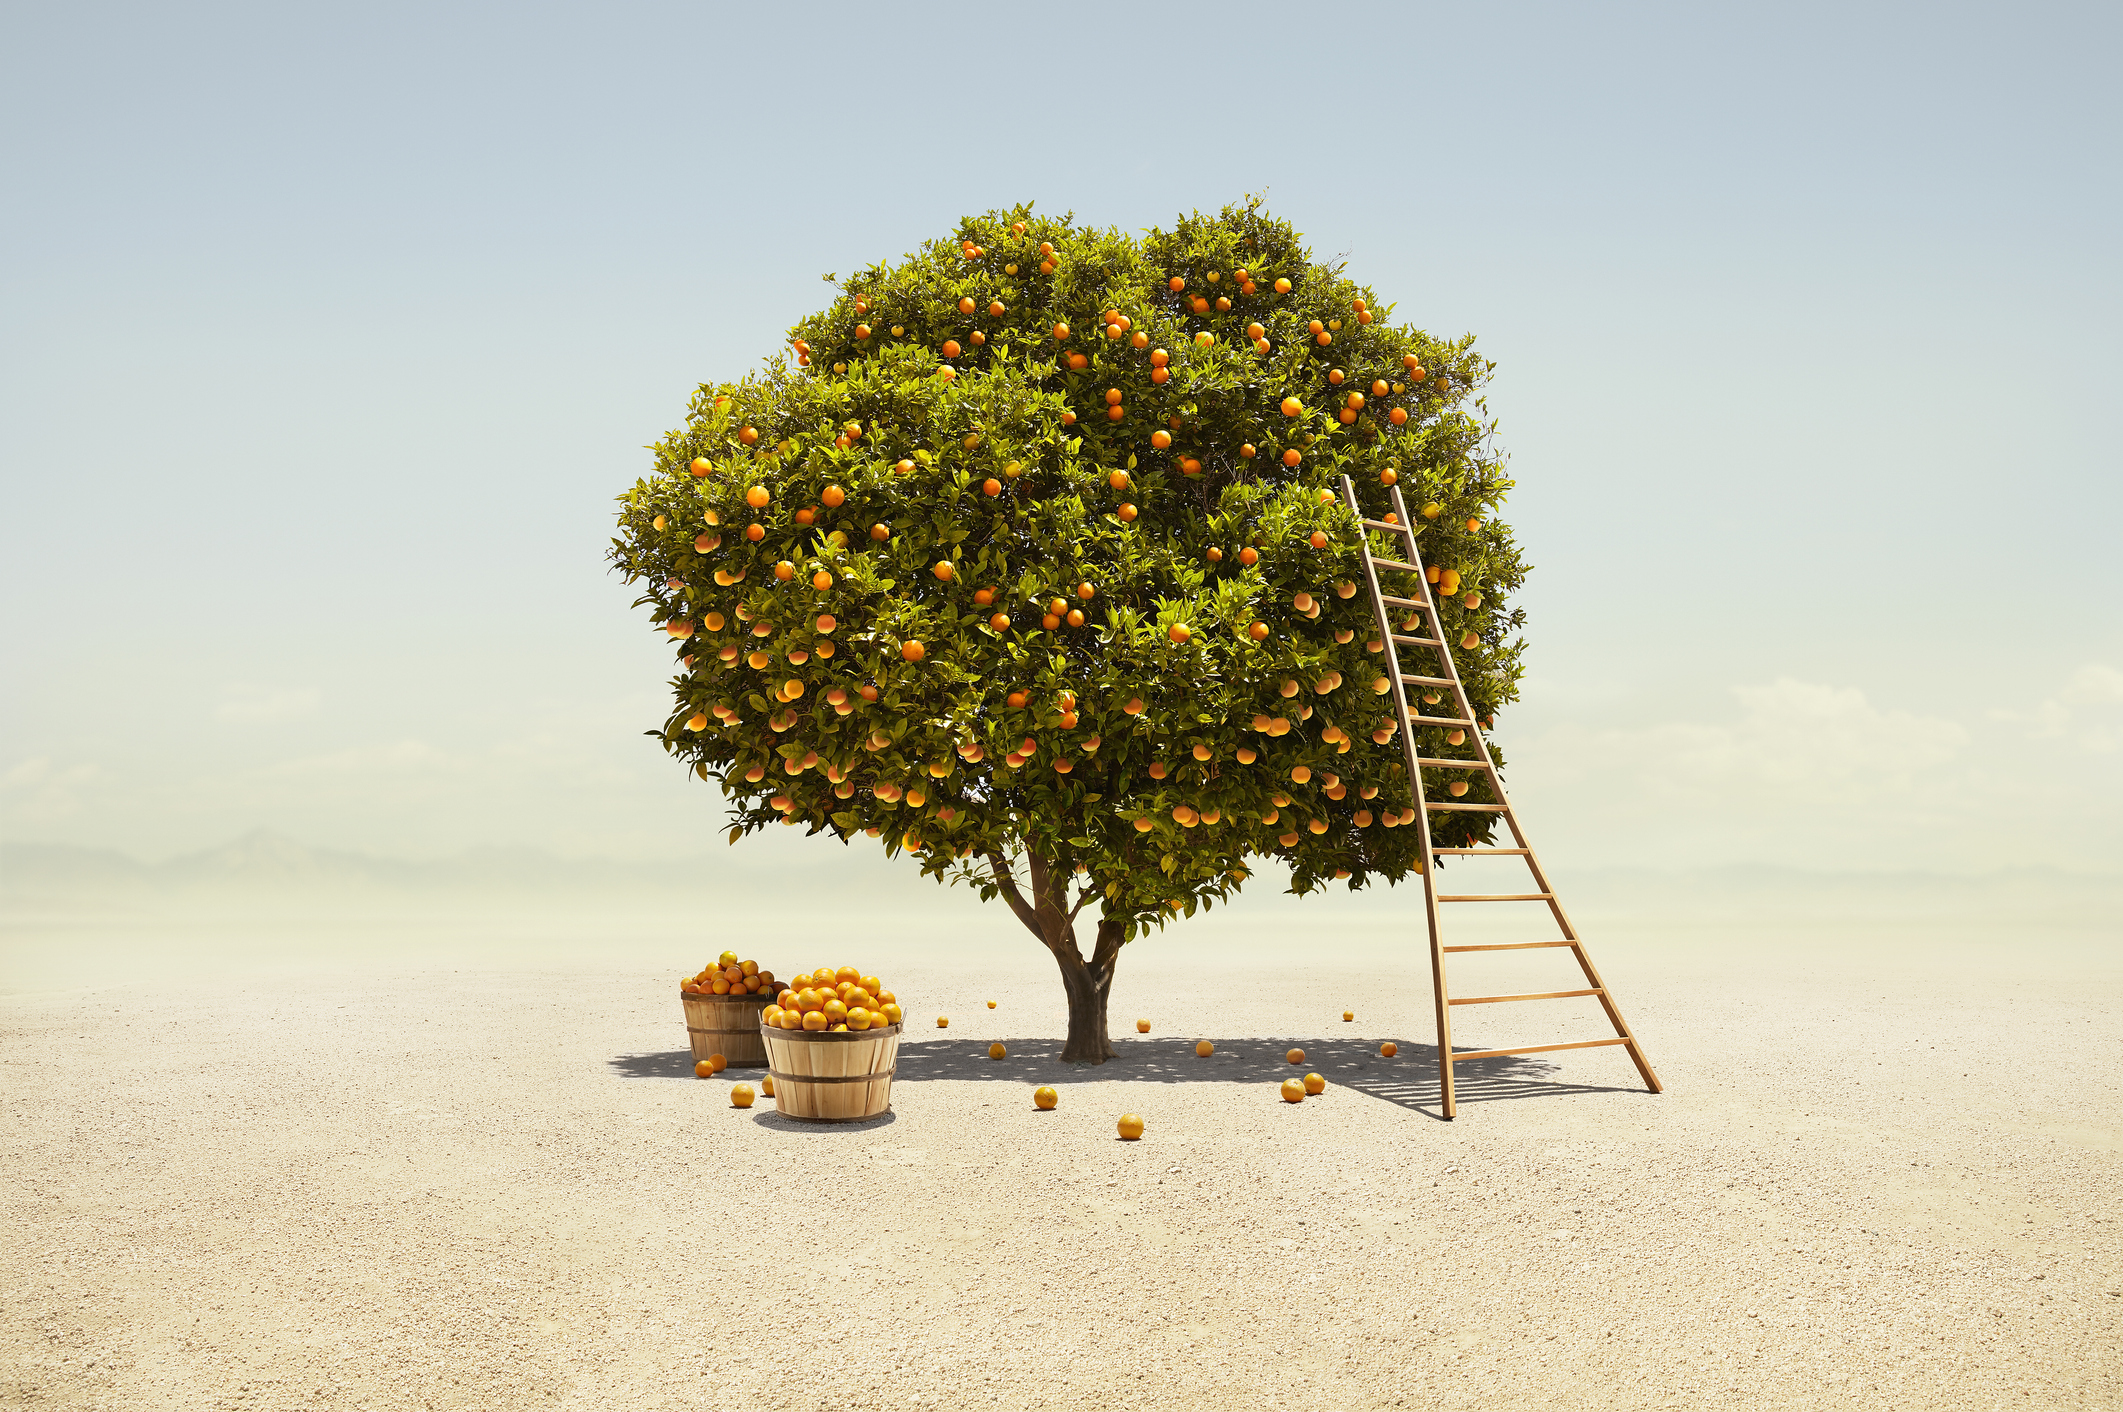 A fully fruiting orange tree is harvested in the barren Southern California desert landscape.  first-time investors who thrive in recessions